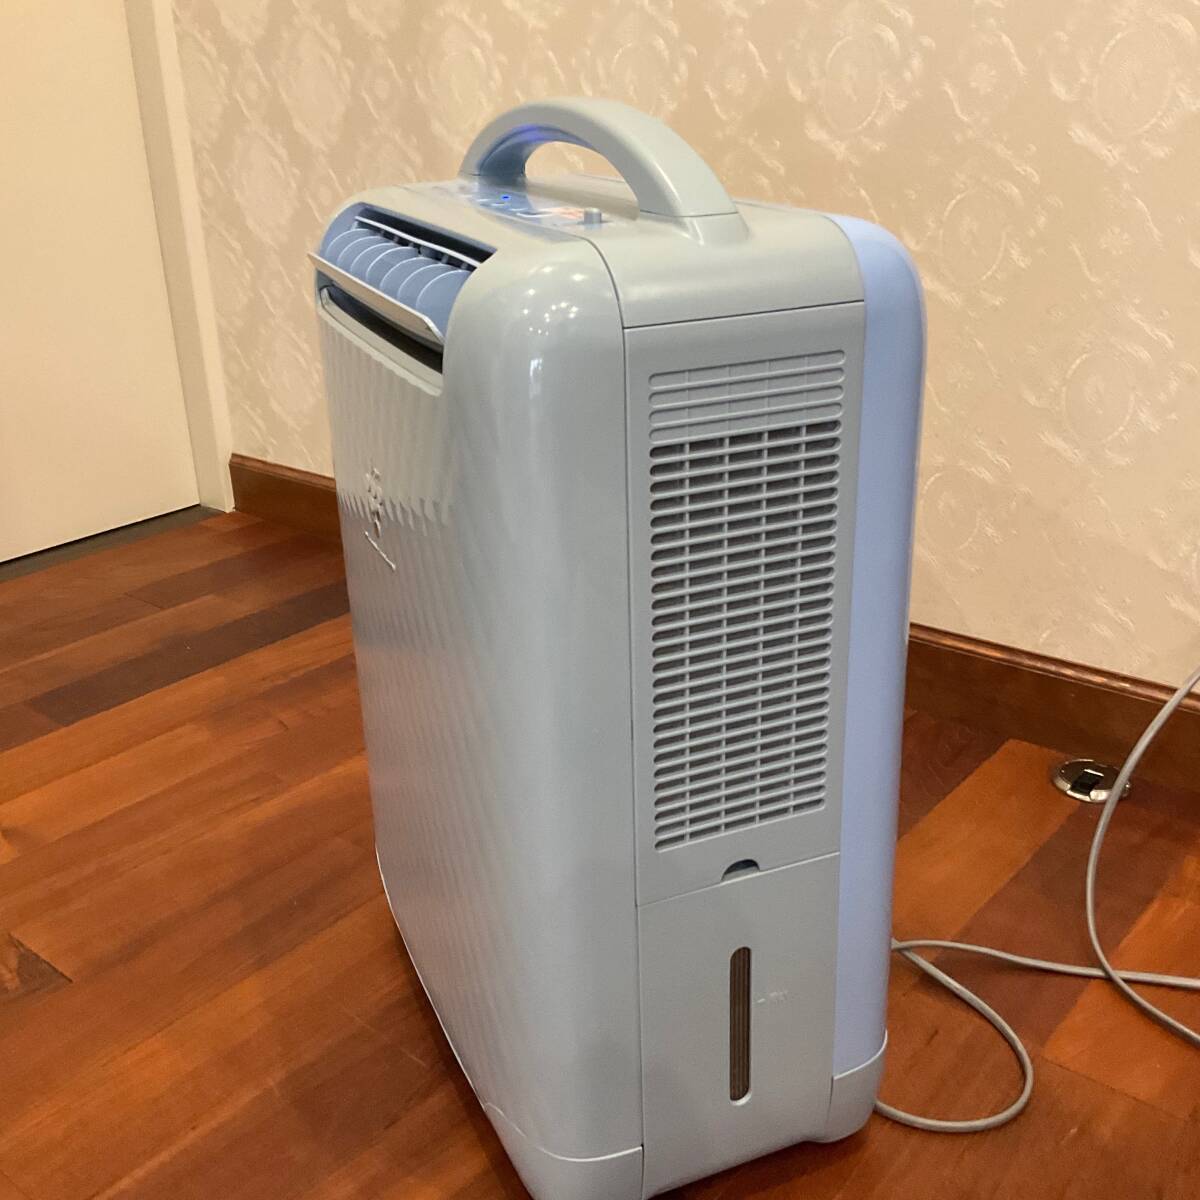  operation verification settled SHARP sharp CV-Y100-A "plasma cluster" clothes dry dehumidifier & cold manner function blue 